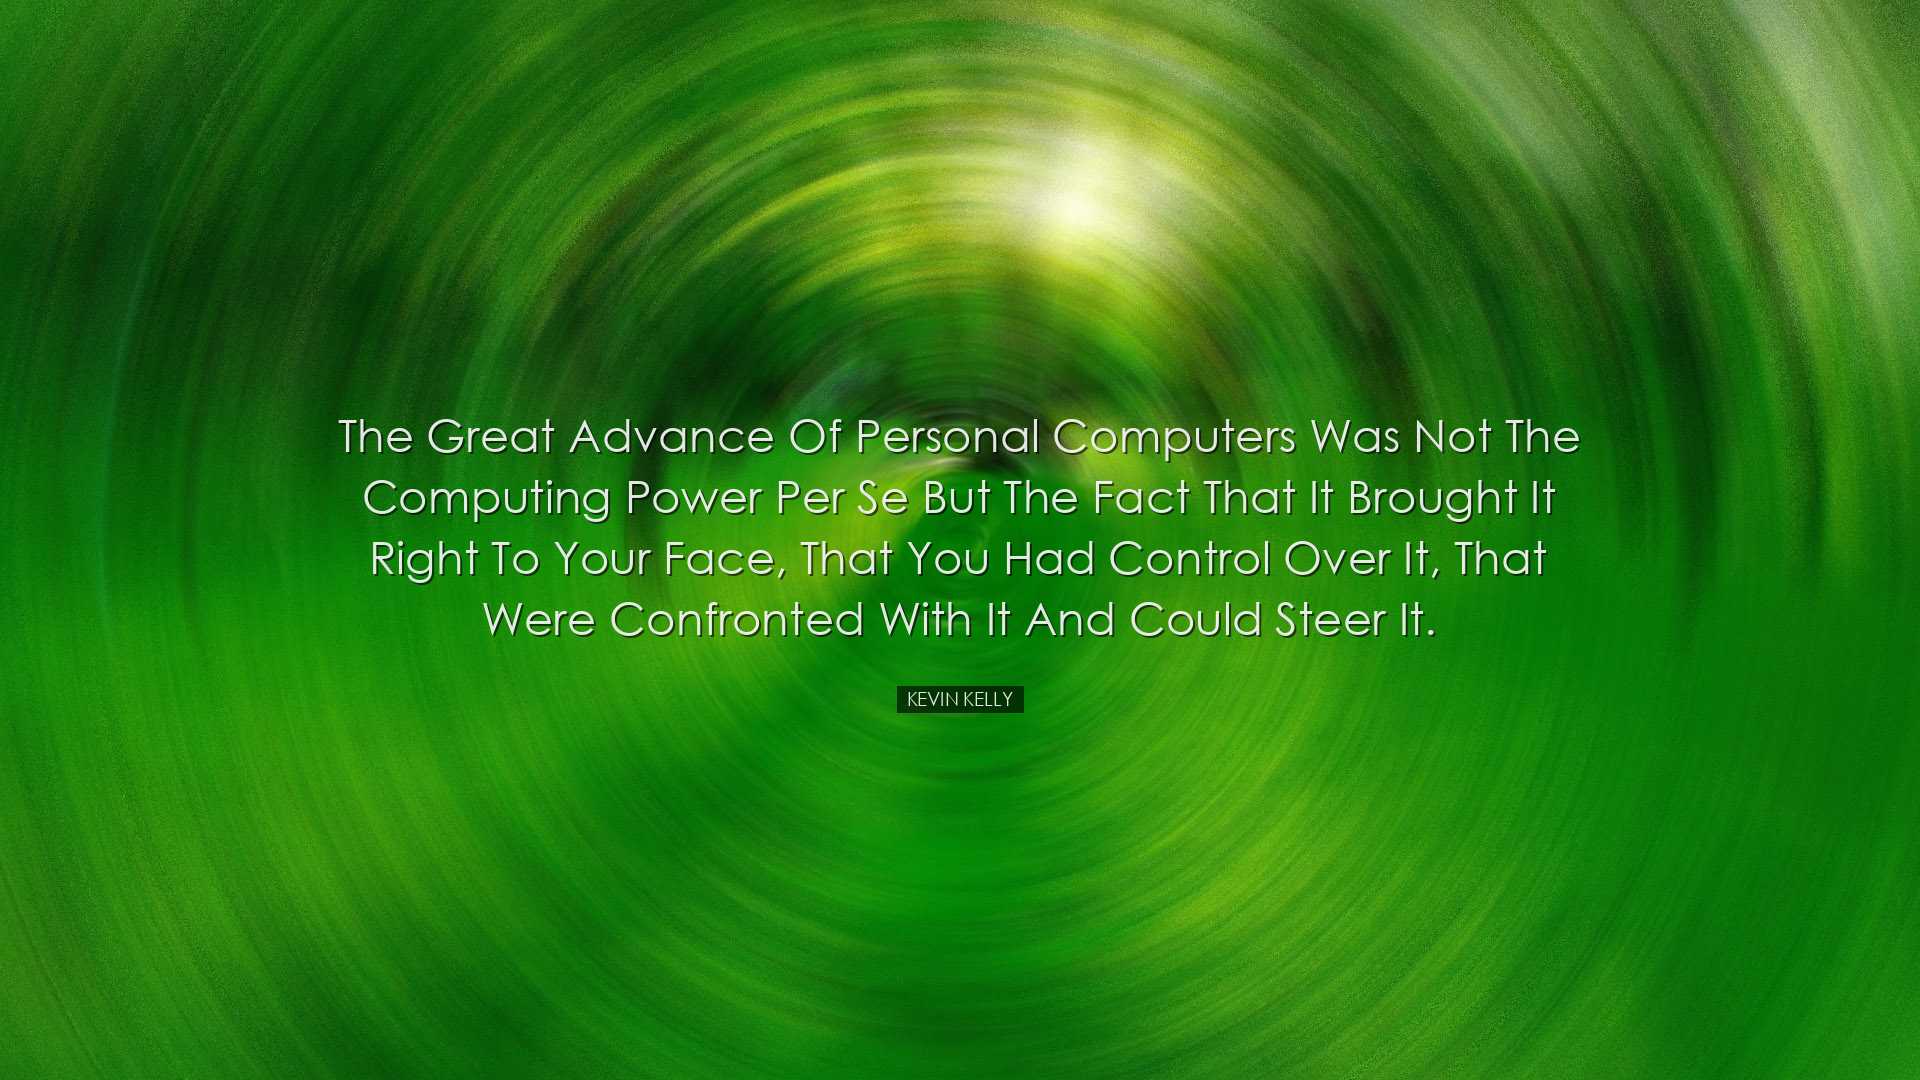 The great advance of personal computers was not the computing powe